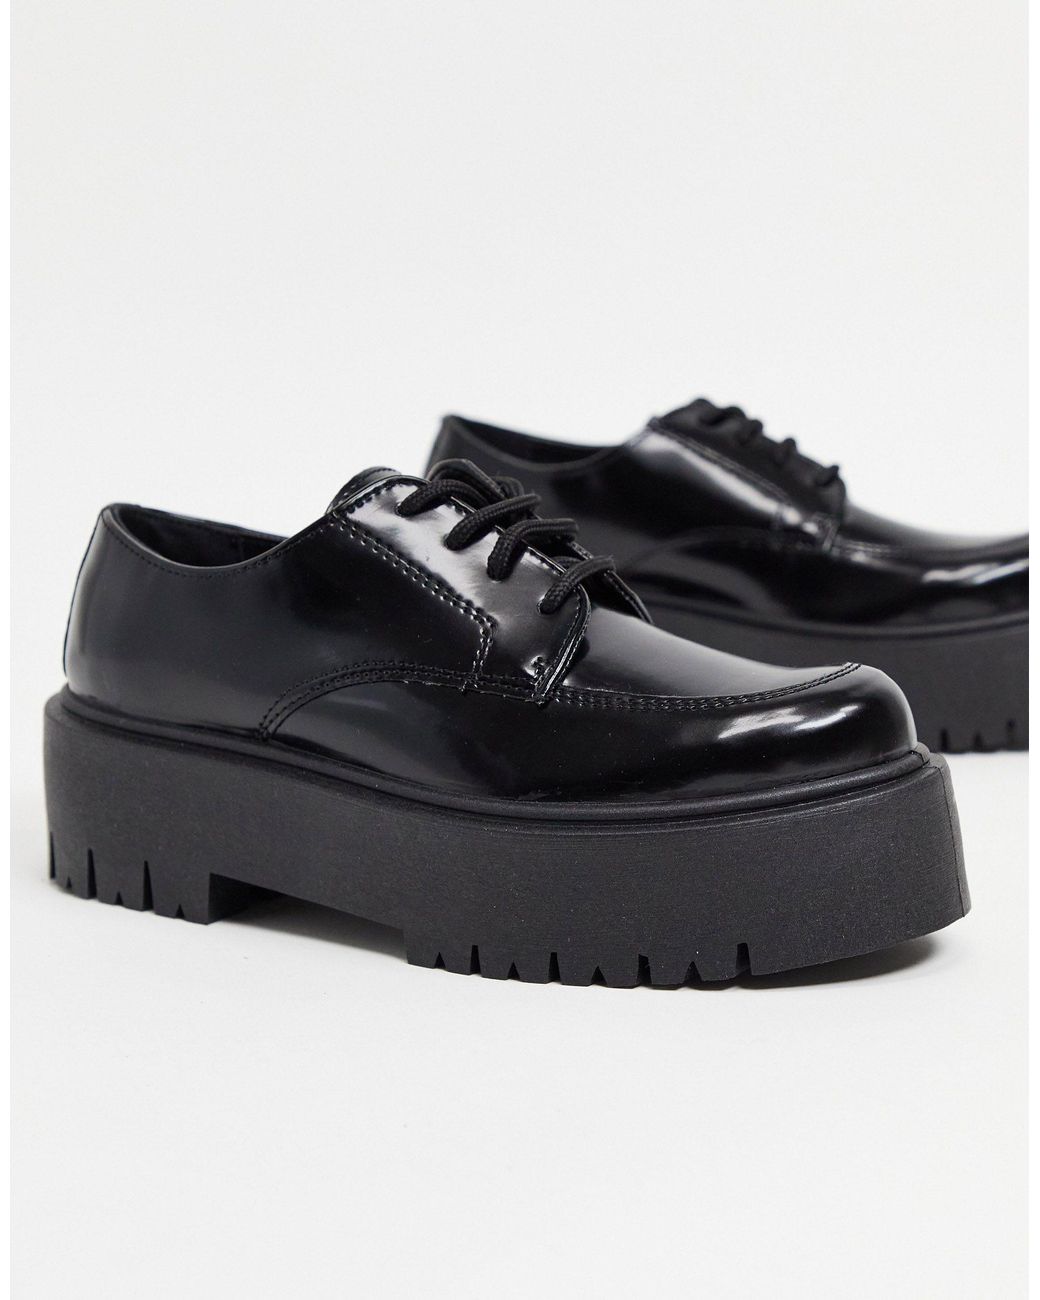 TOPSHOP Platform Lace Up Loafers in Black | Lyst